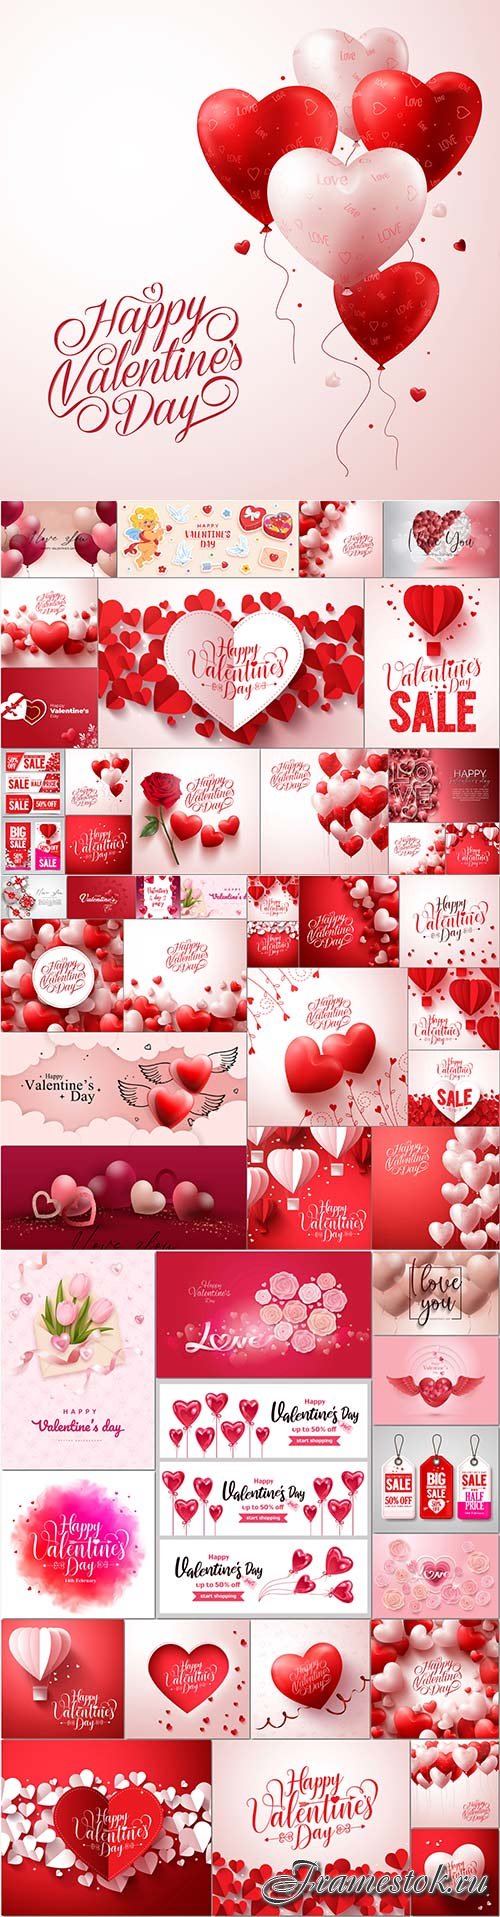 Valentines day concept background vector illustration red and pink hearts vector